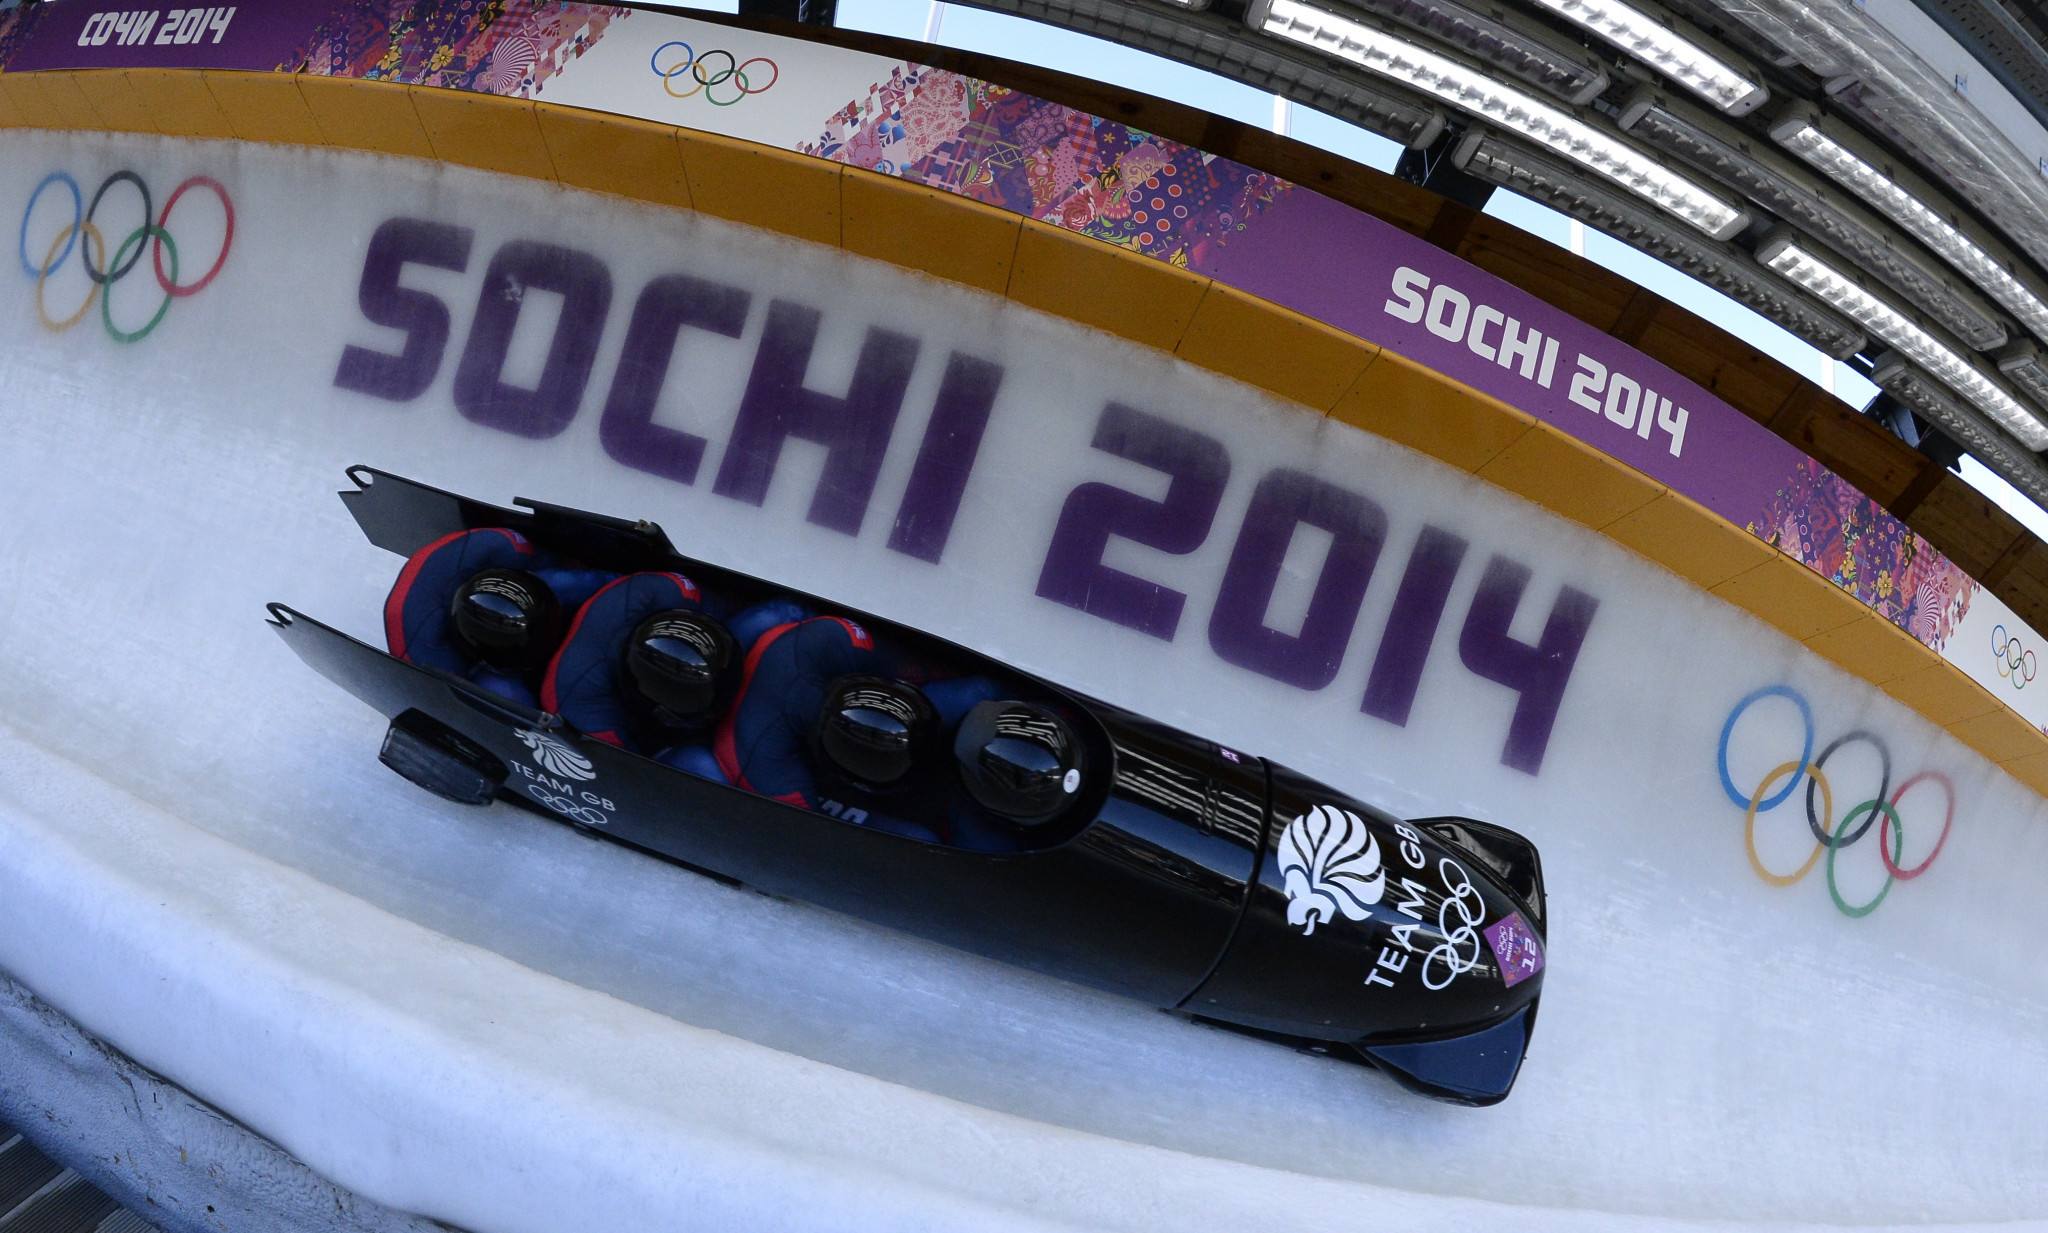 Great Britain's four-man bobsleigh team originally finished fifth at Sochi 2014 but the disqualification of two Russian crews has seen them awarded the Olympic bronze medal ©Getty Images